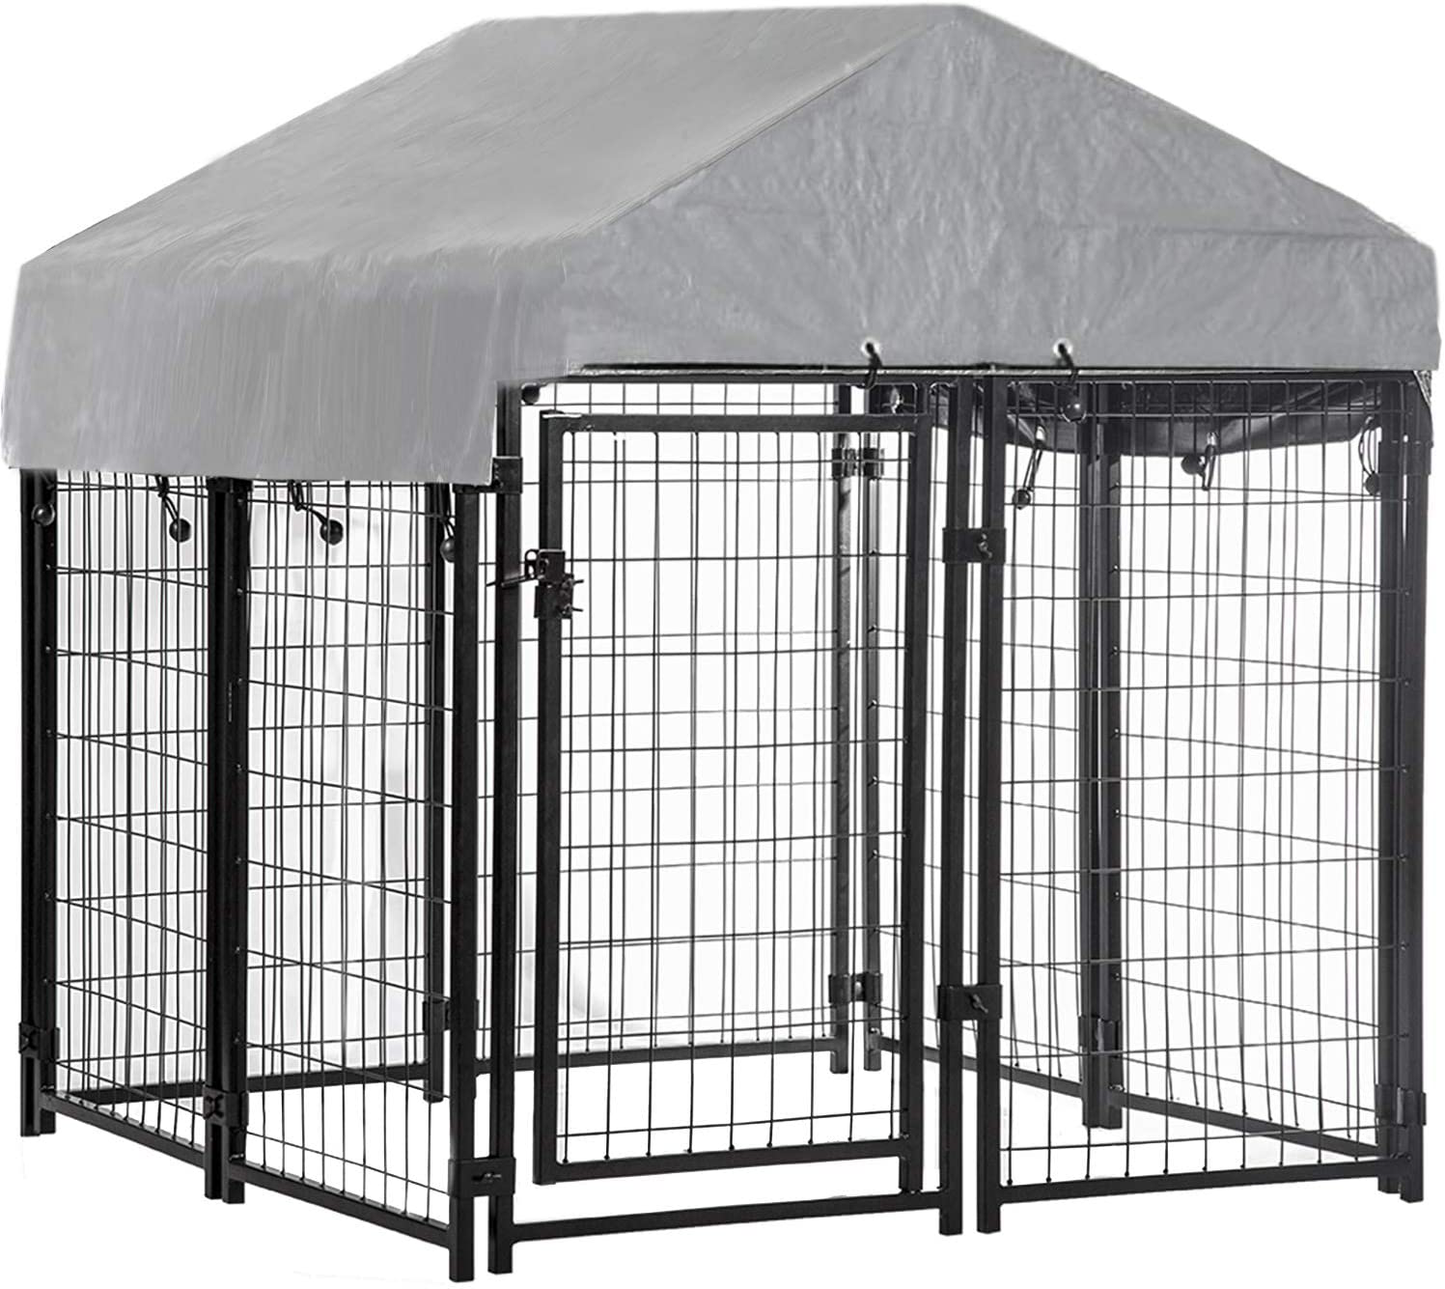 Bestpet Dog Crate Pet Kennel Cage Puppy Playpen Wire Animal Metal Camping Indoor Outdoor Cage for Large Dogs with Roof, 4 X 4 X 4.3,7.5 X 3.75 X 5.8 Feet Animals & Pet Supplies > Pet Supplies > Dog Supplies > Dog Kennels & Runs BestPet 4'x4'x4.3'  